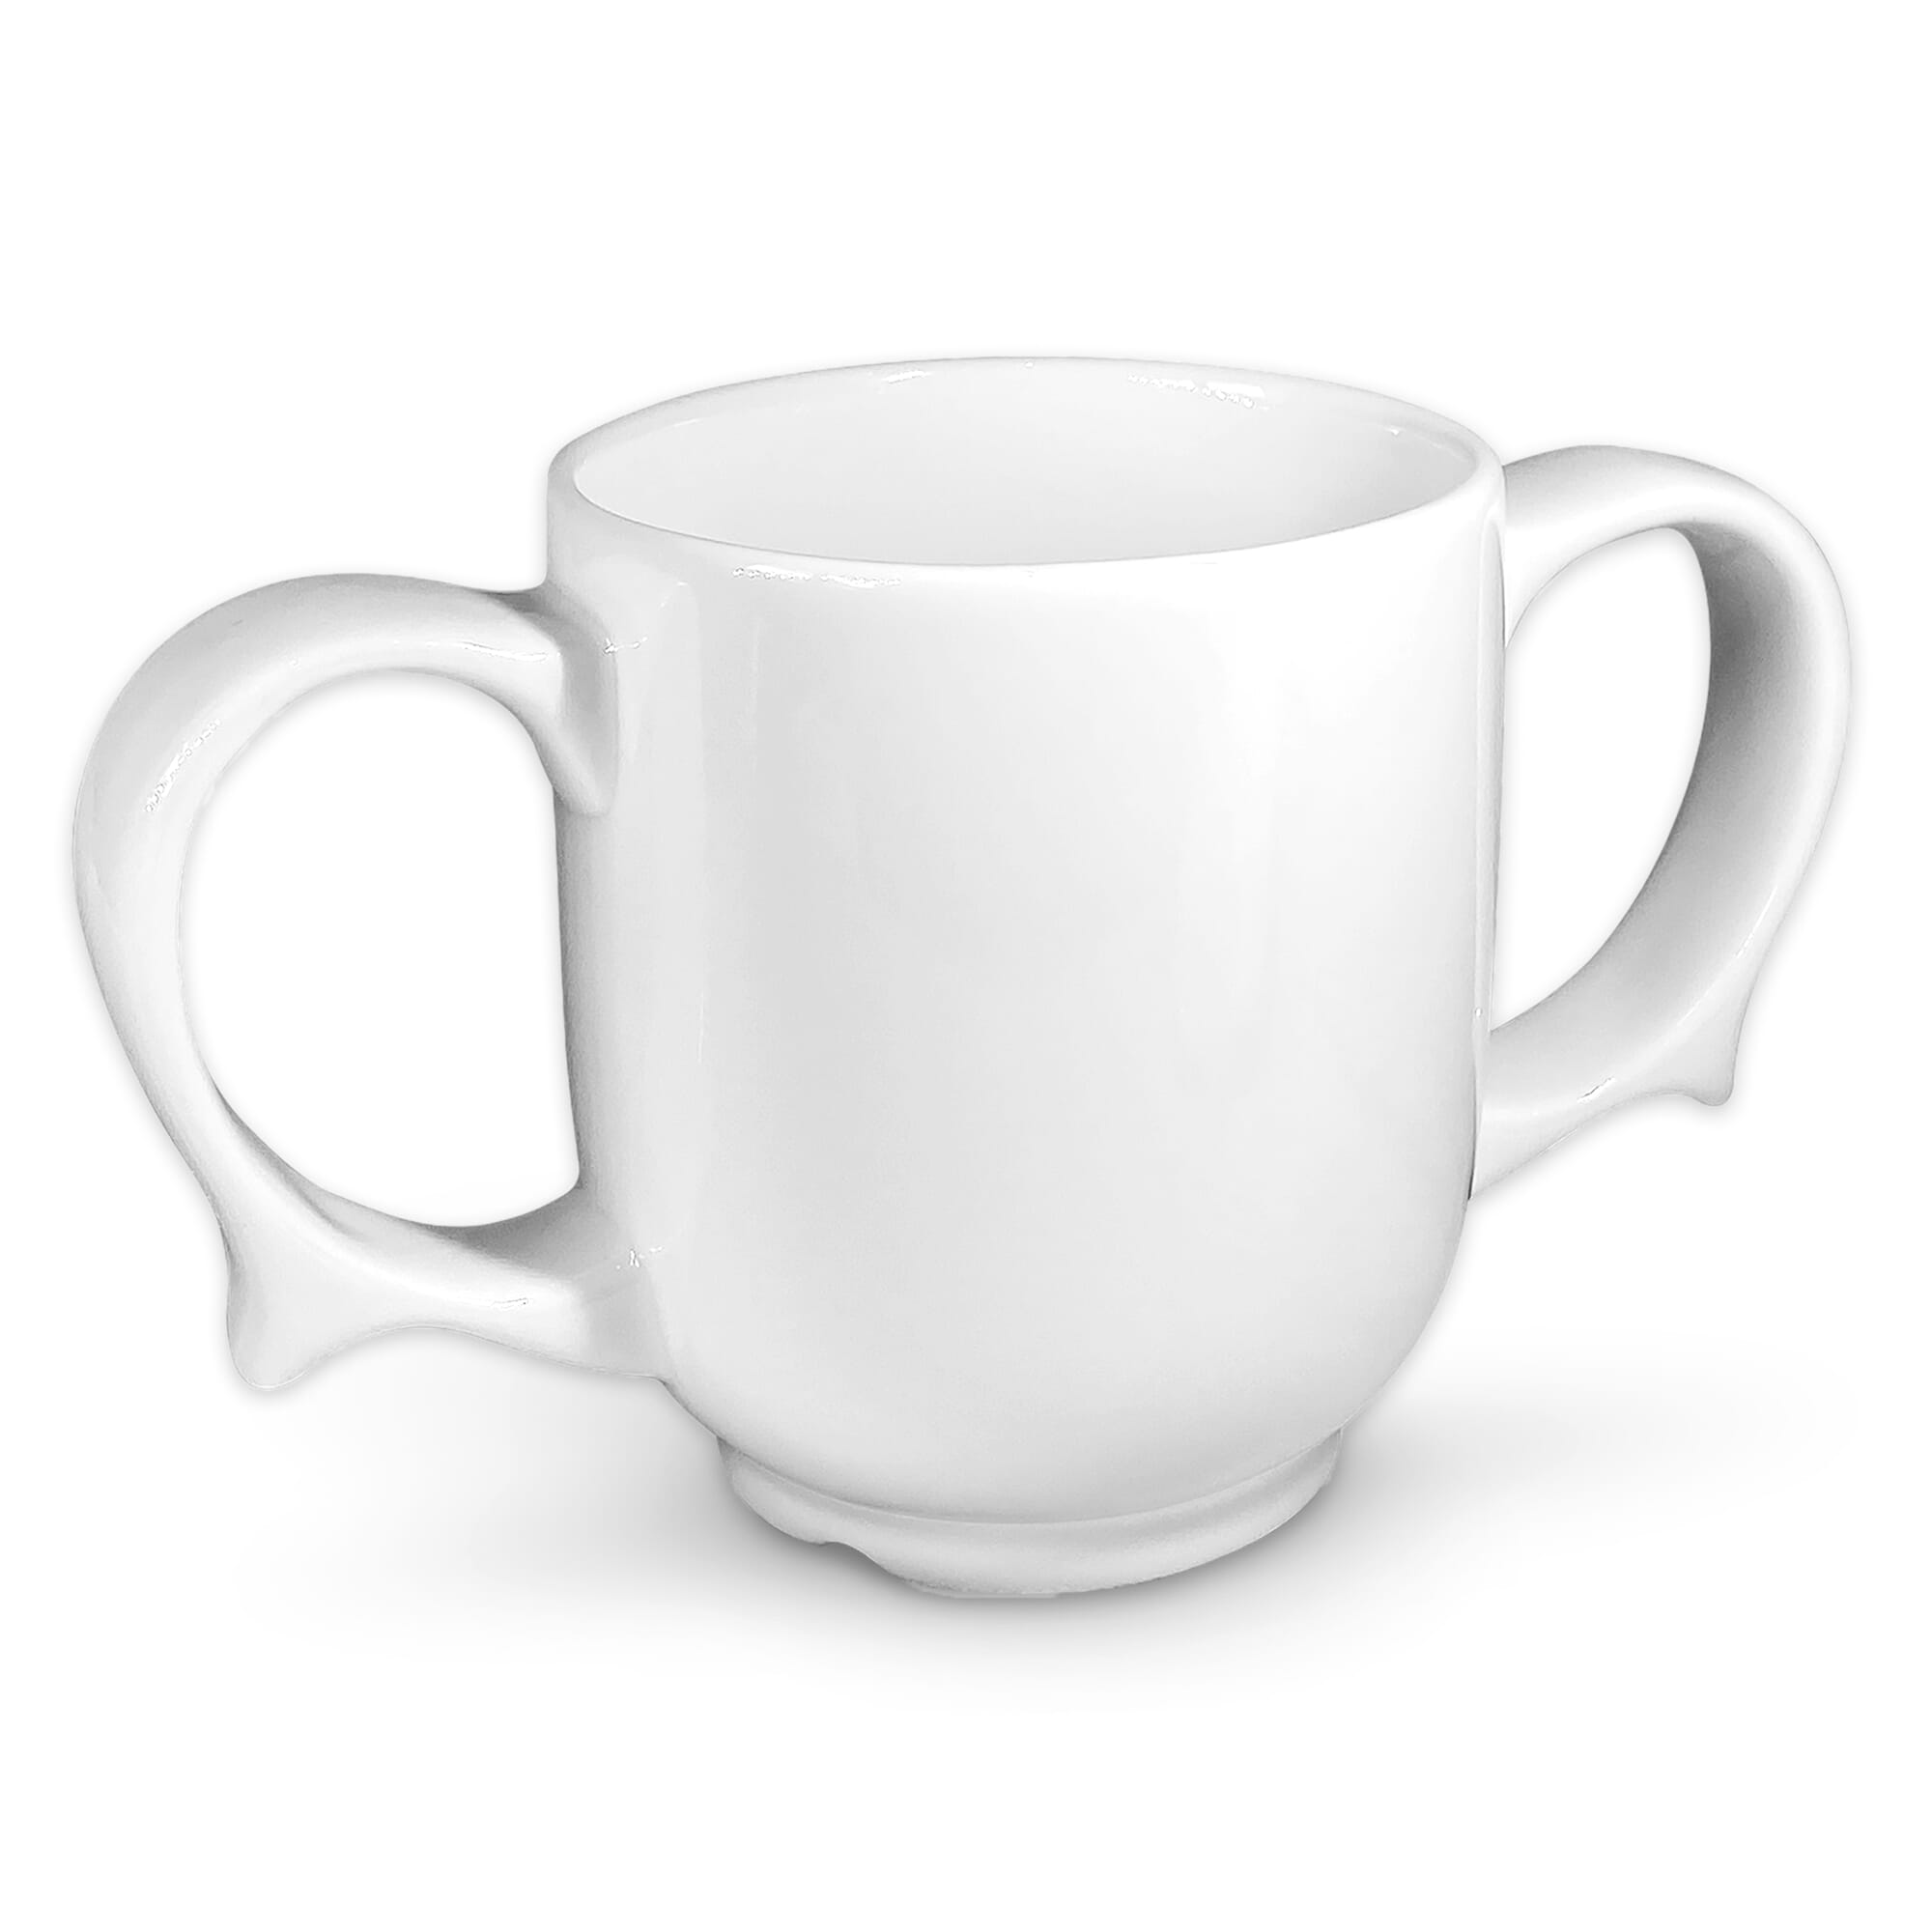 View Dignity Two Handled Mug White information